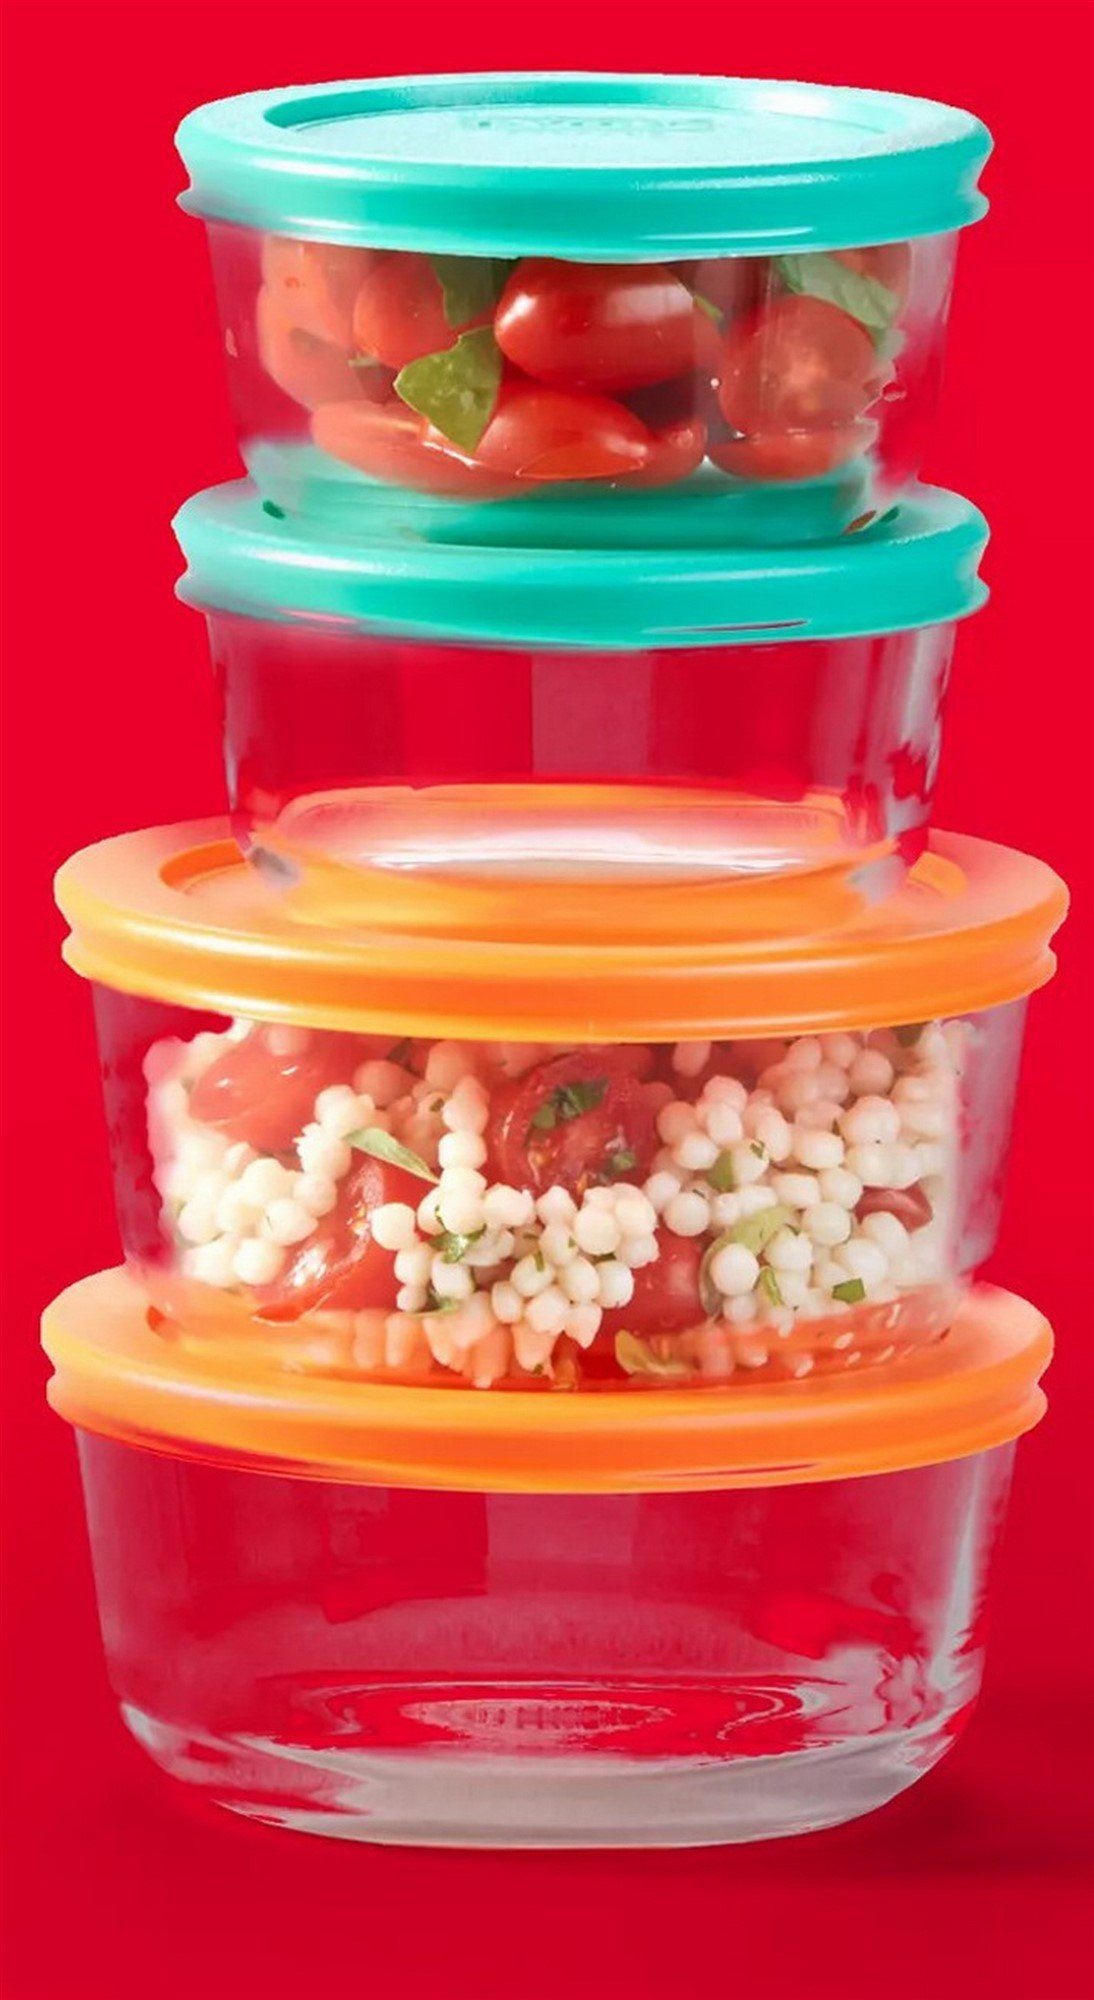 Pyrex 30 Piece Glass Food Storage Containers Simply Store Set